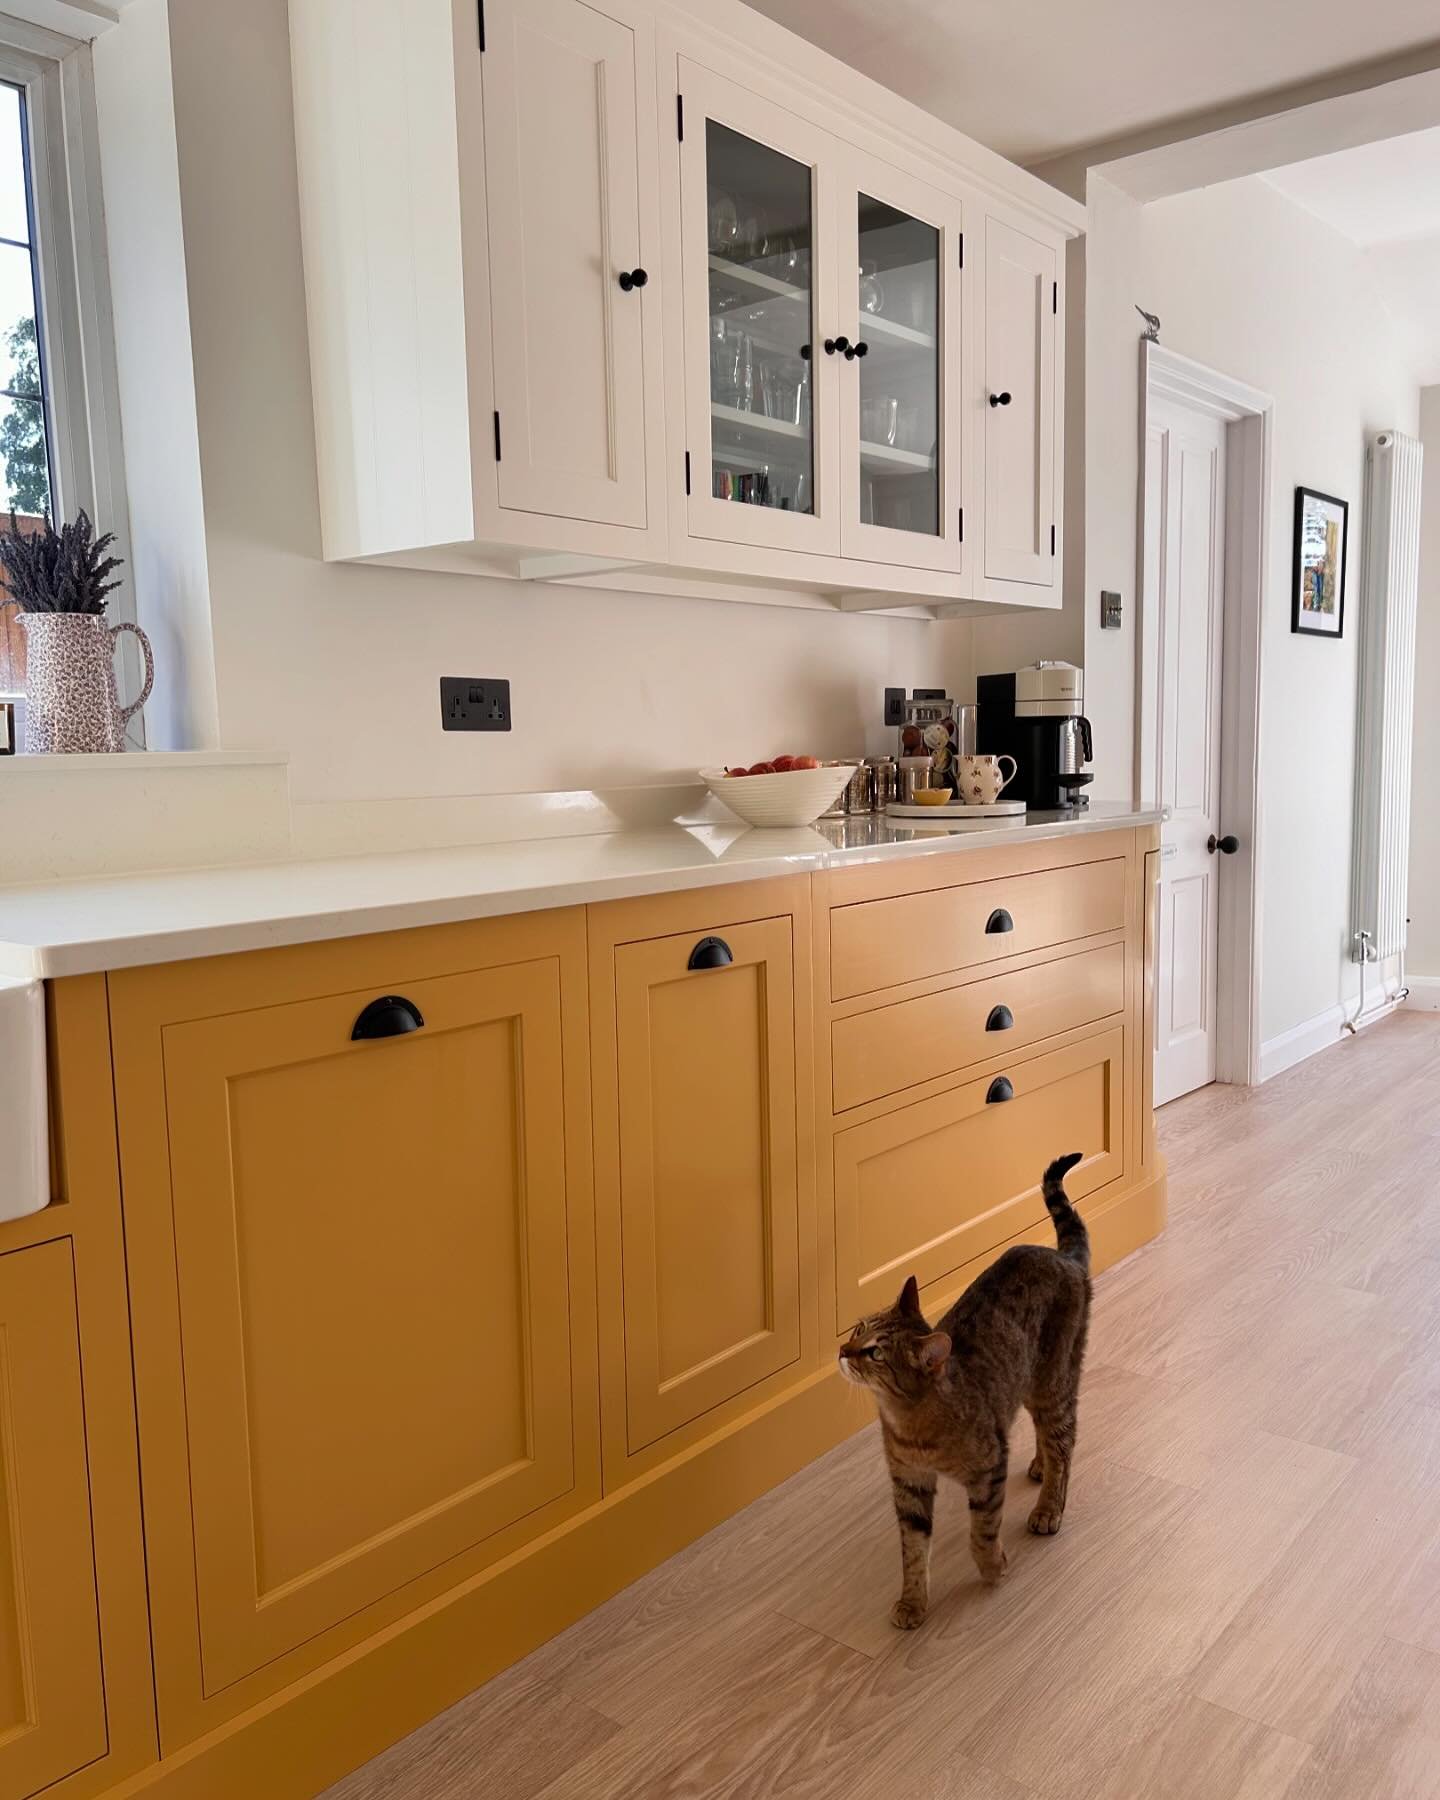 Our kitchen renovation is complete! 🥳🤩 (Except for the blind for the window which is coming soon). Am absolutely THRILLED with how it turned out &amp; still cannot believe I finally persuaded my OH that a yellow kitchen was a good idea 😆 All the p